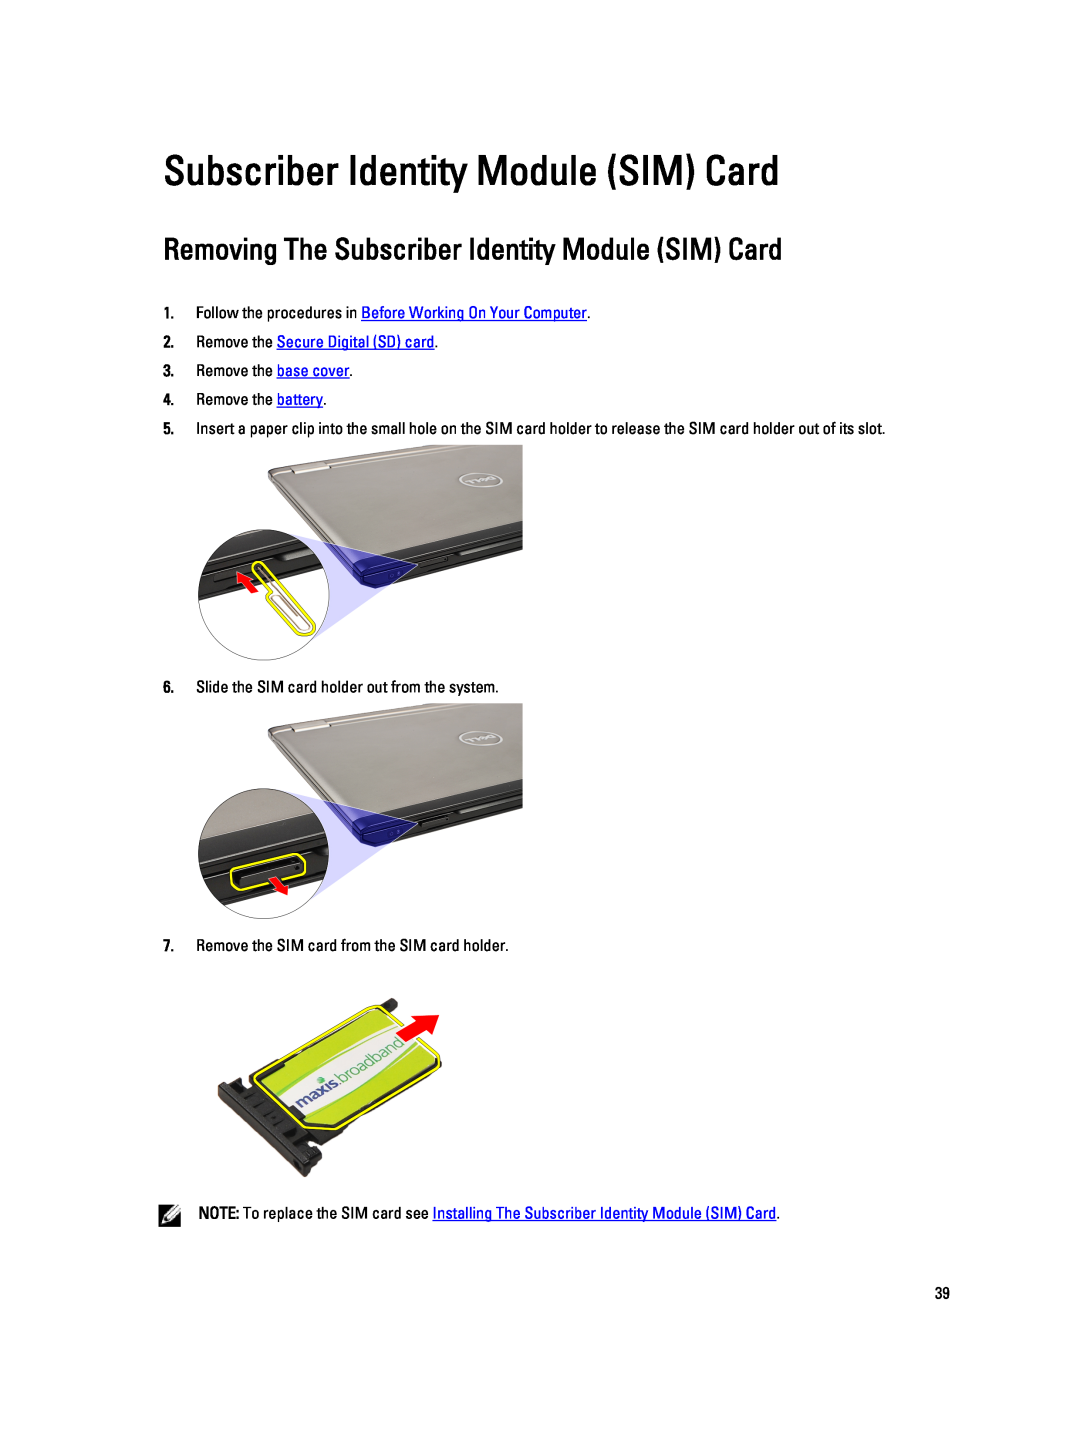 Dell V130 Removing The Subscriber Identity Module SIM Card, Follow the procedures in Before Working On Your Computer 